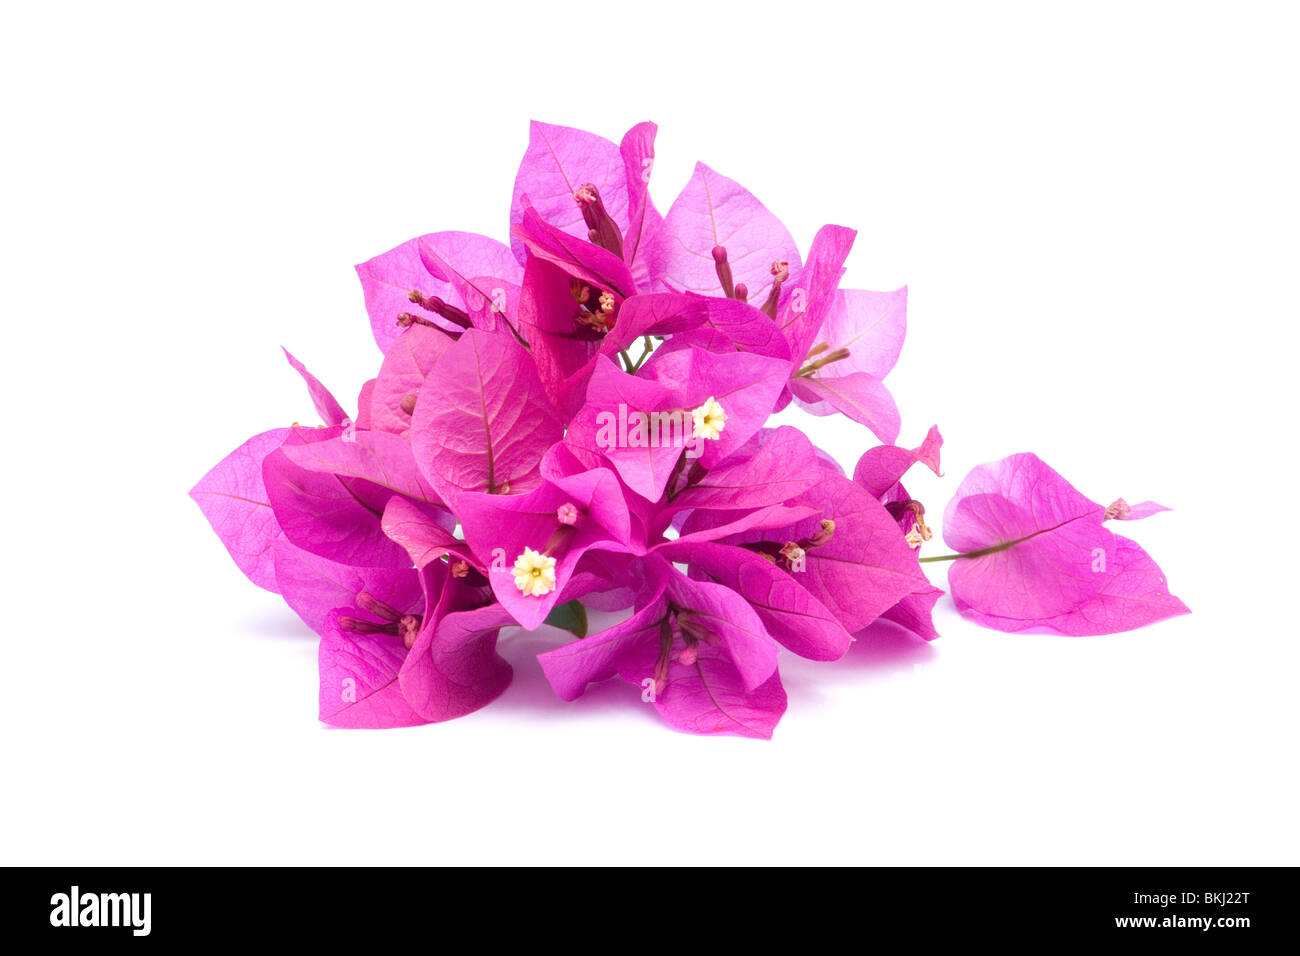 Pink bougainvillea flowers on white background Stock Photo